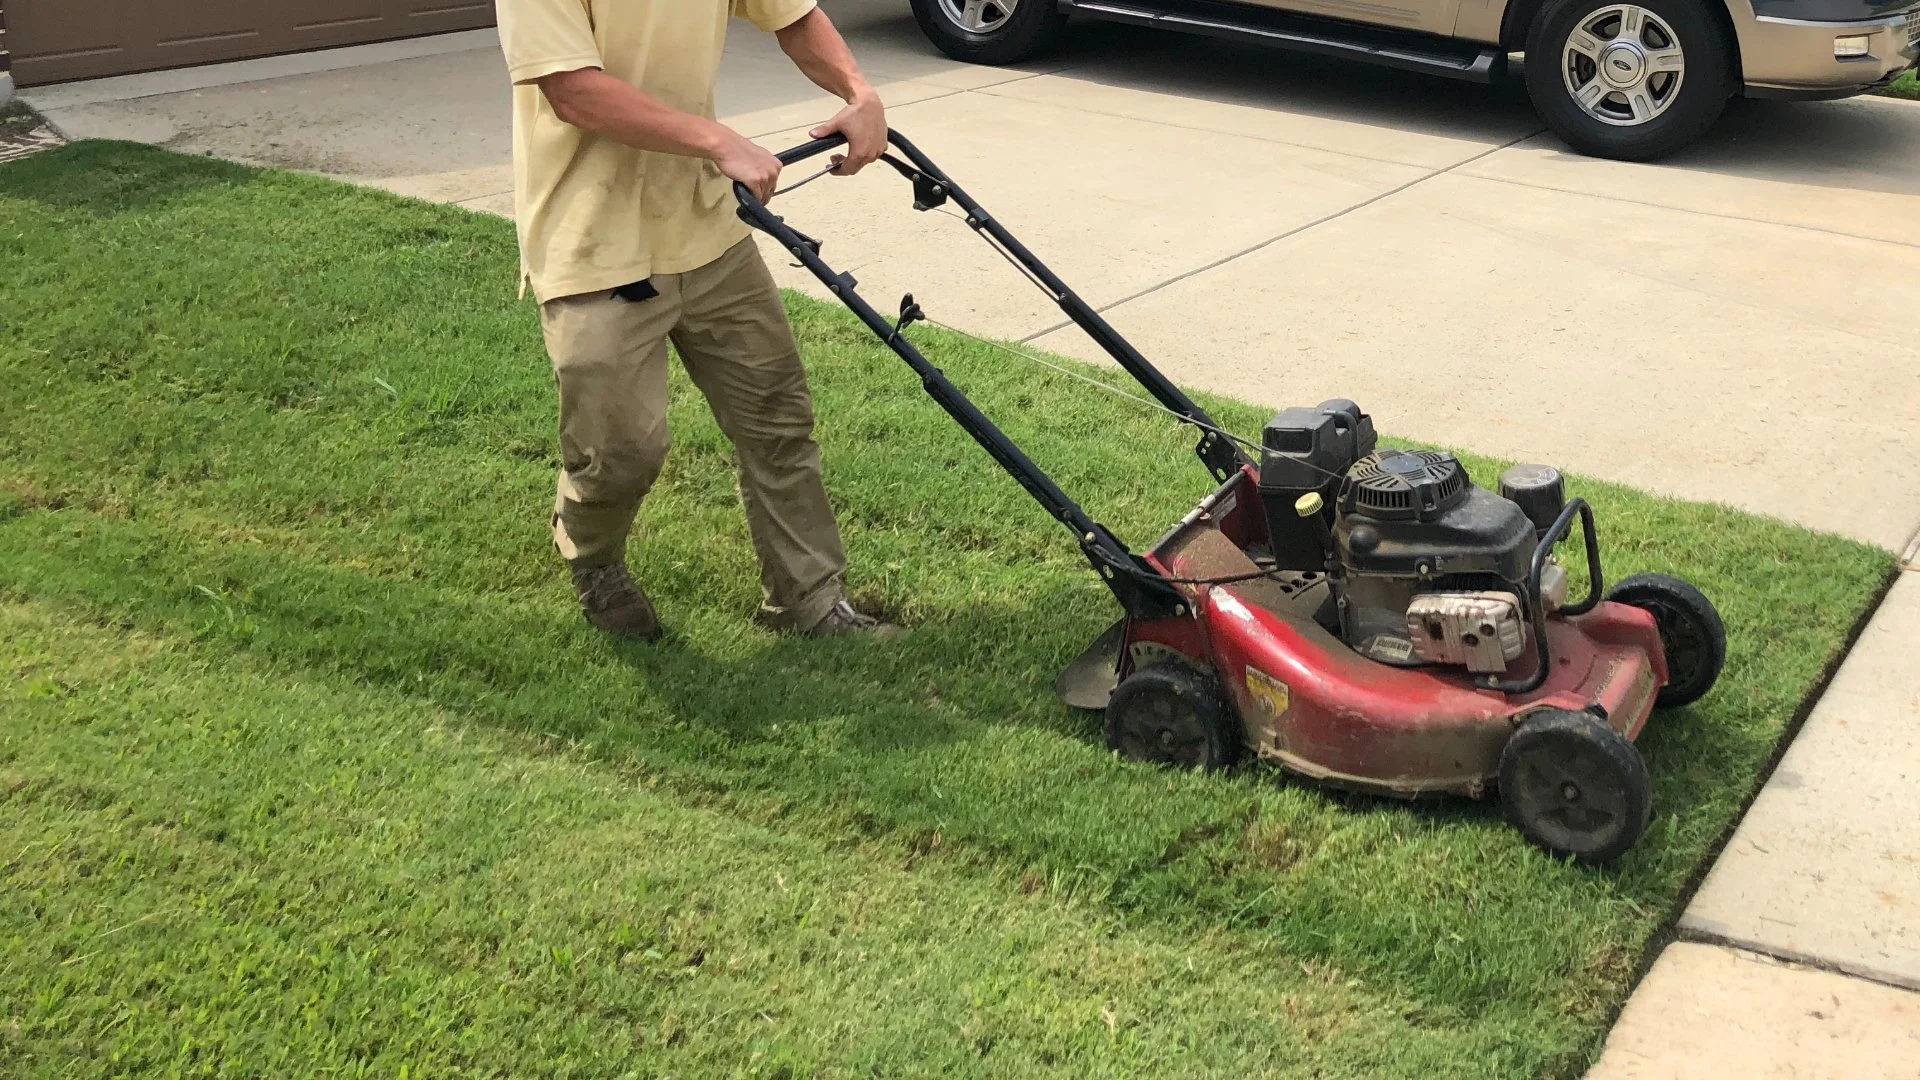 3 Things You Should Check on Your Lawn Mower Before Cutting Your Grass